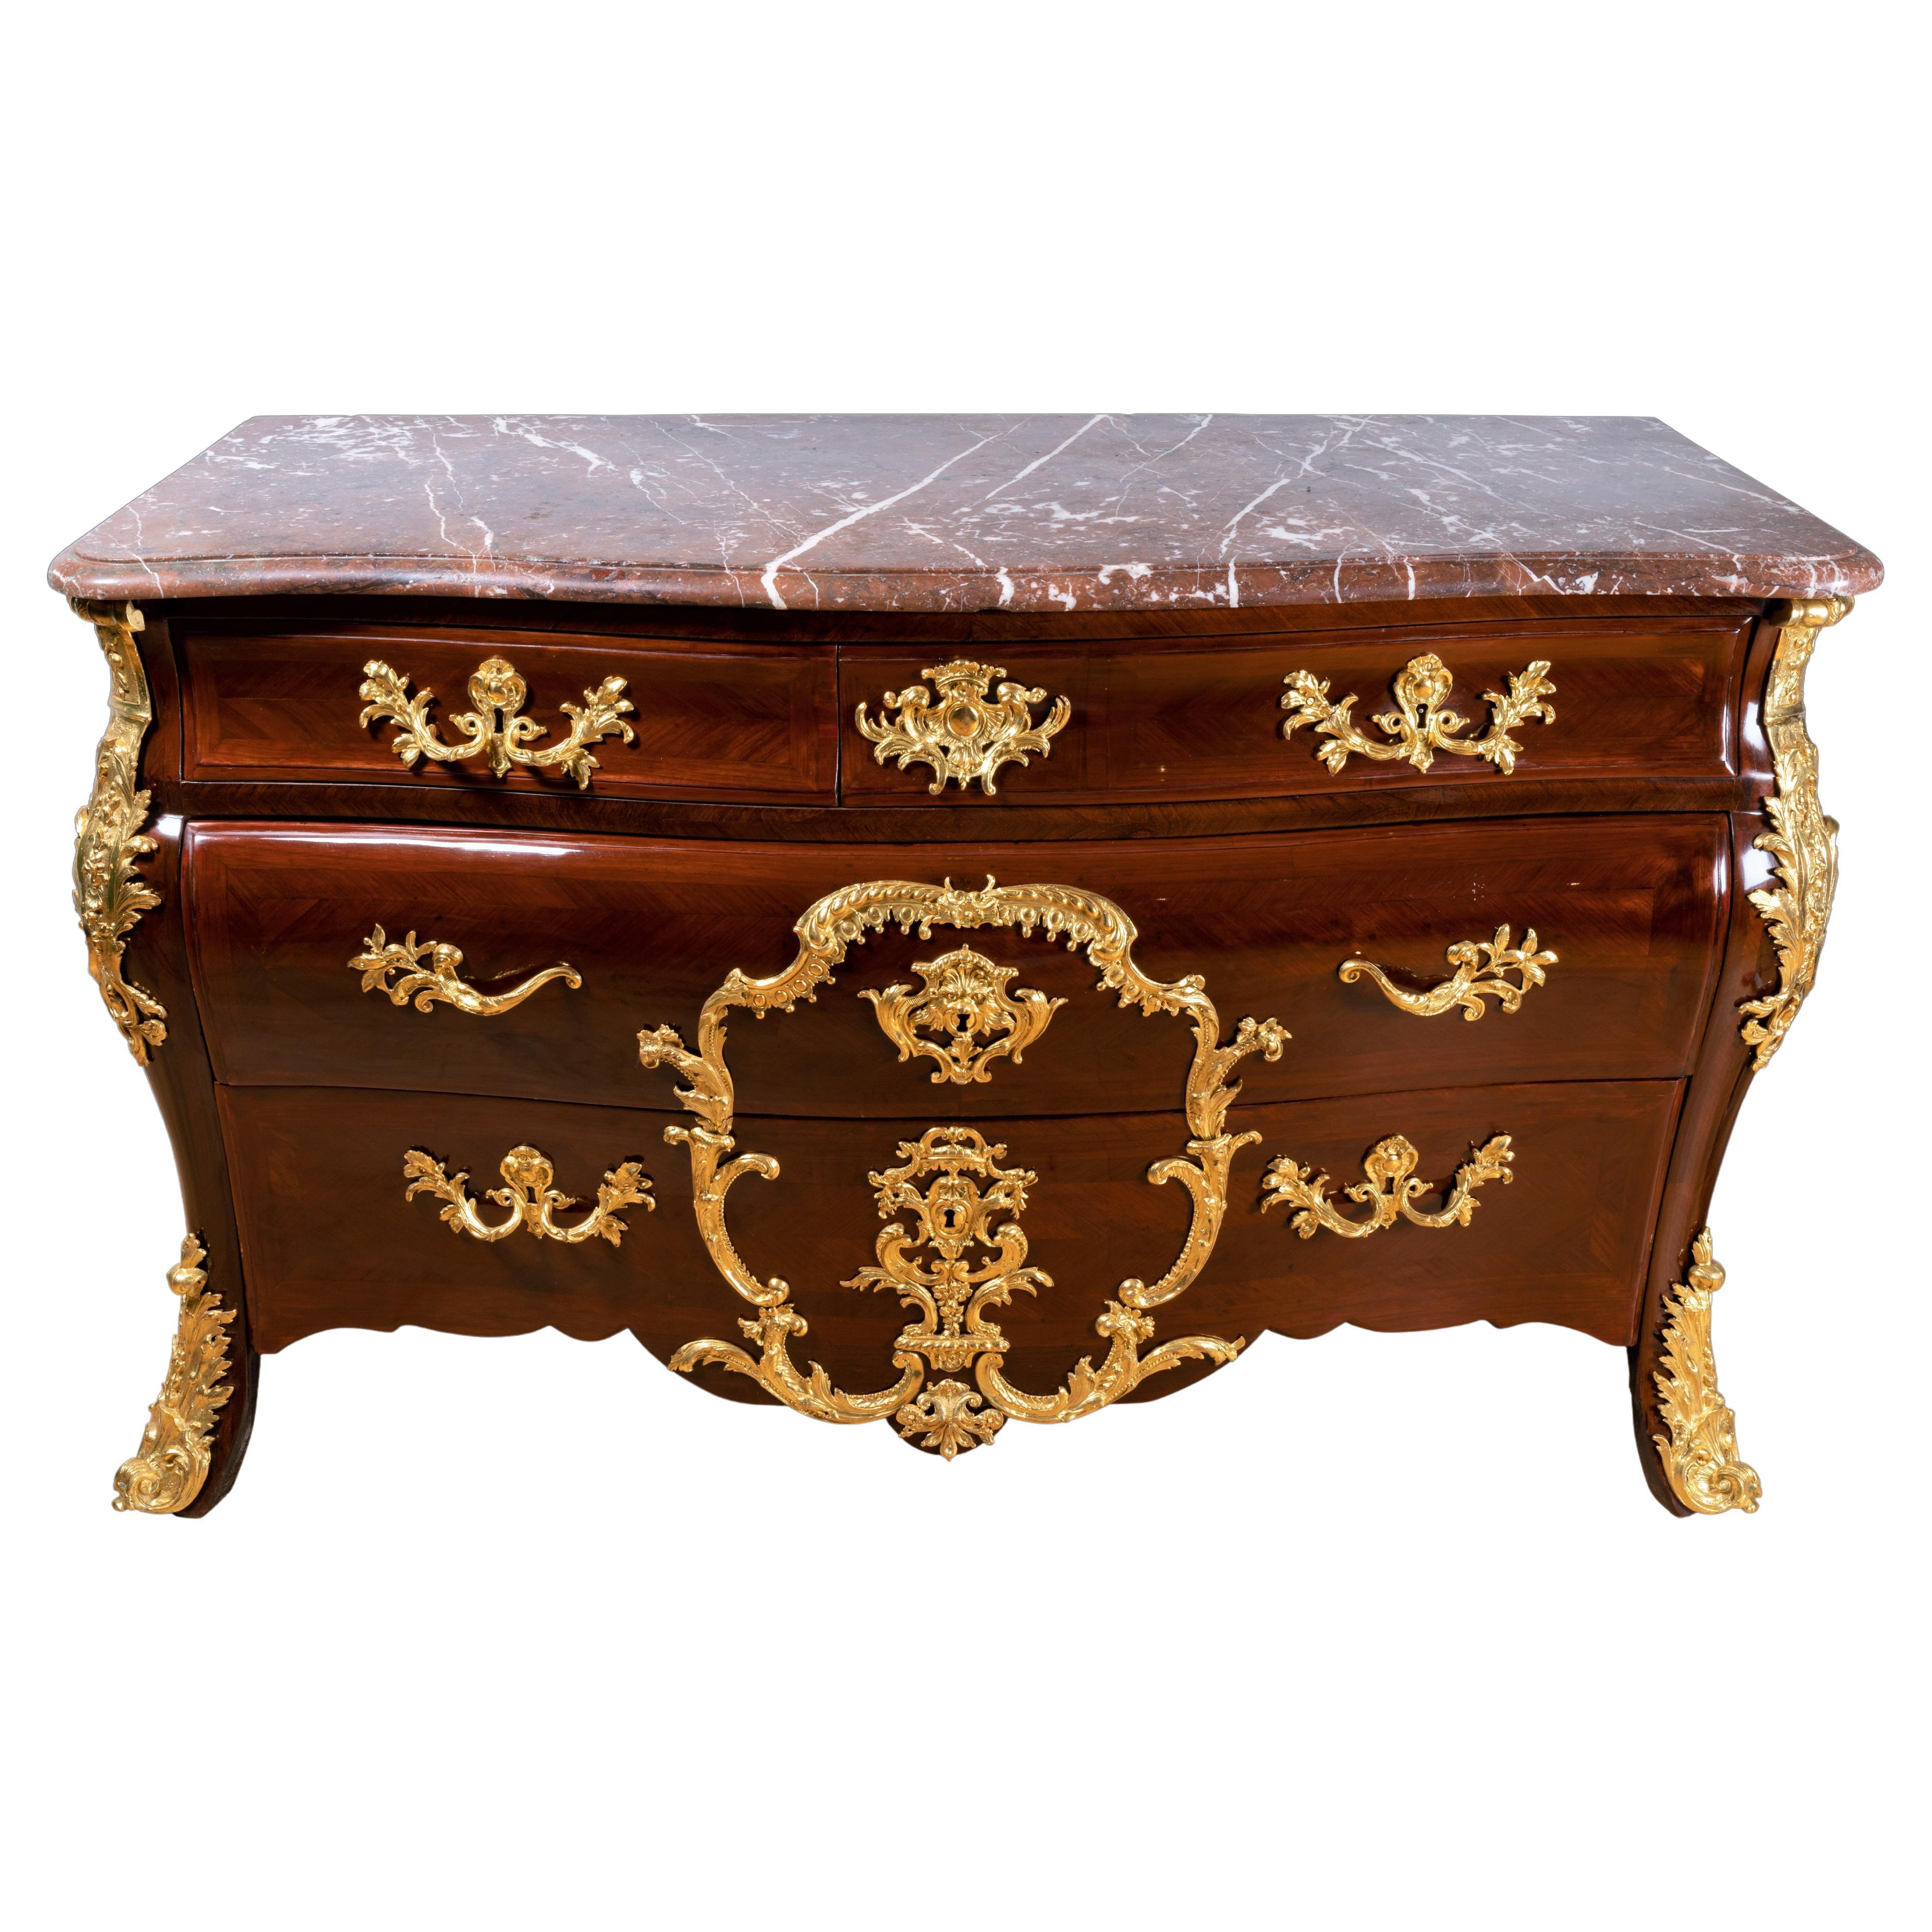 French 18th Century Regence Ormolu-Mounted Commode by Etienne Doirat